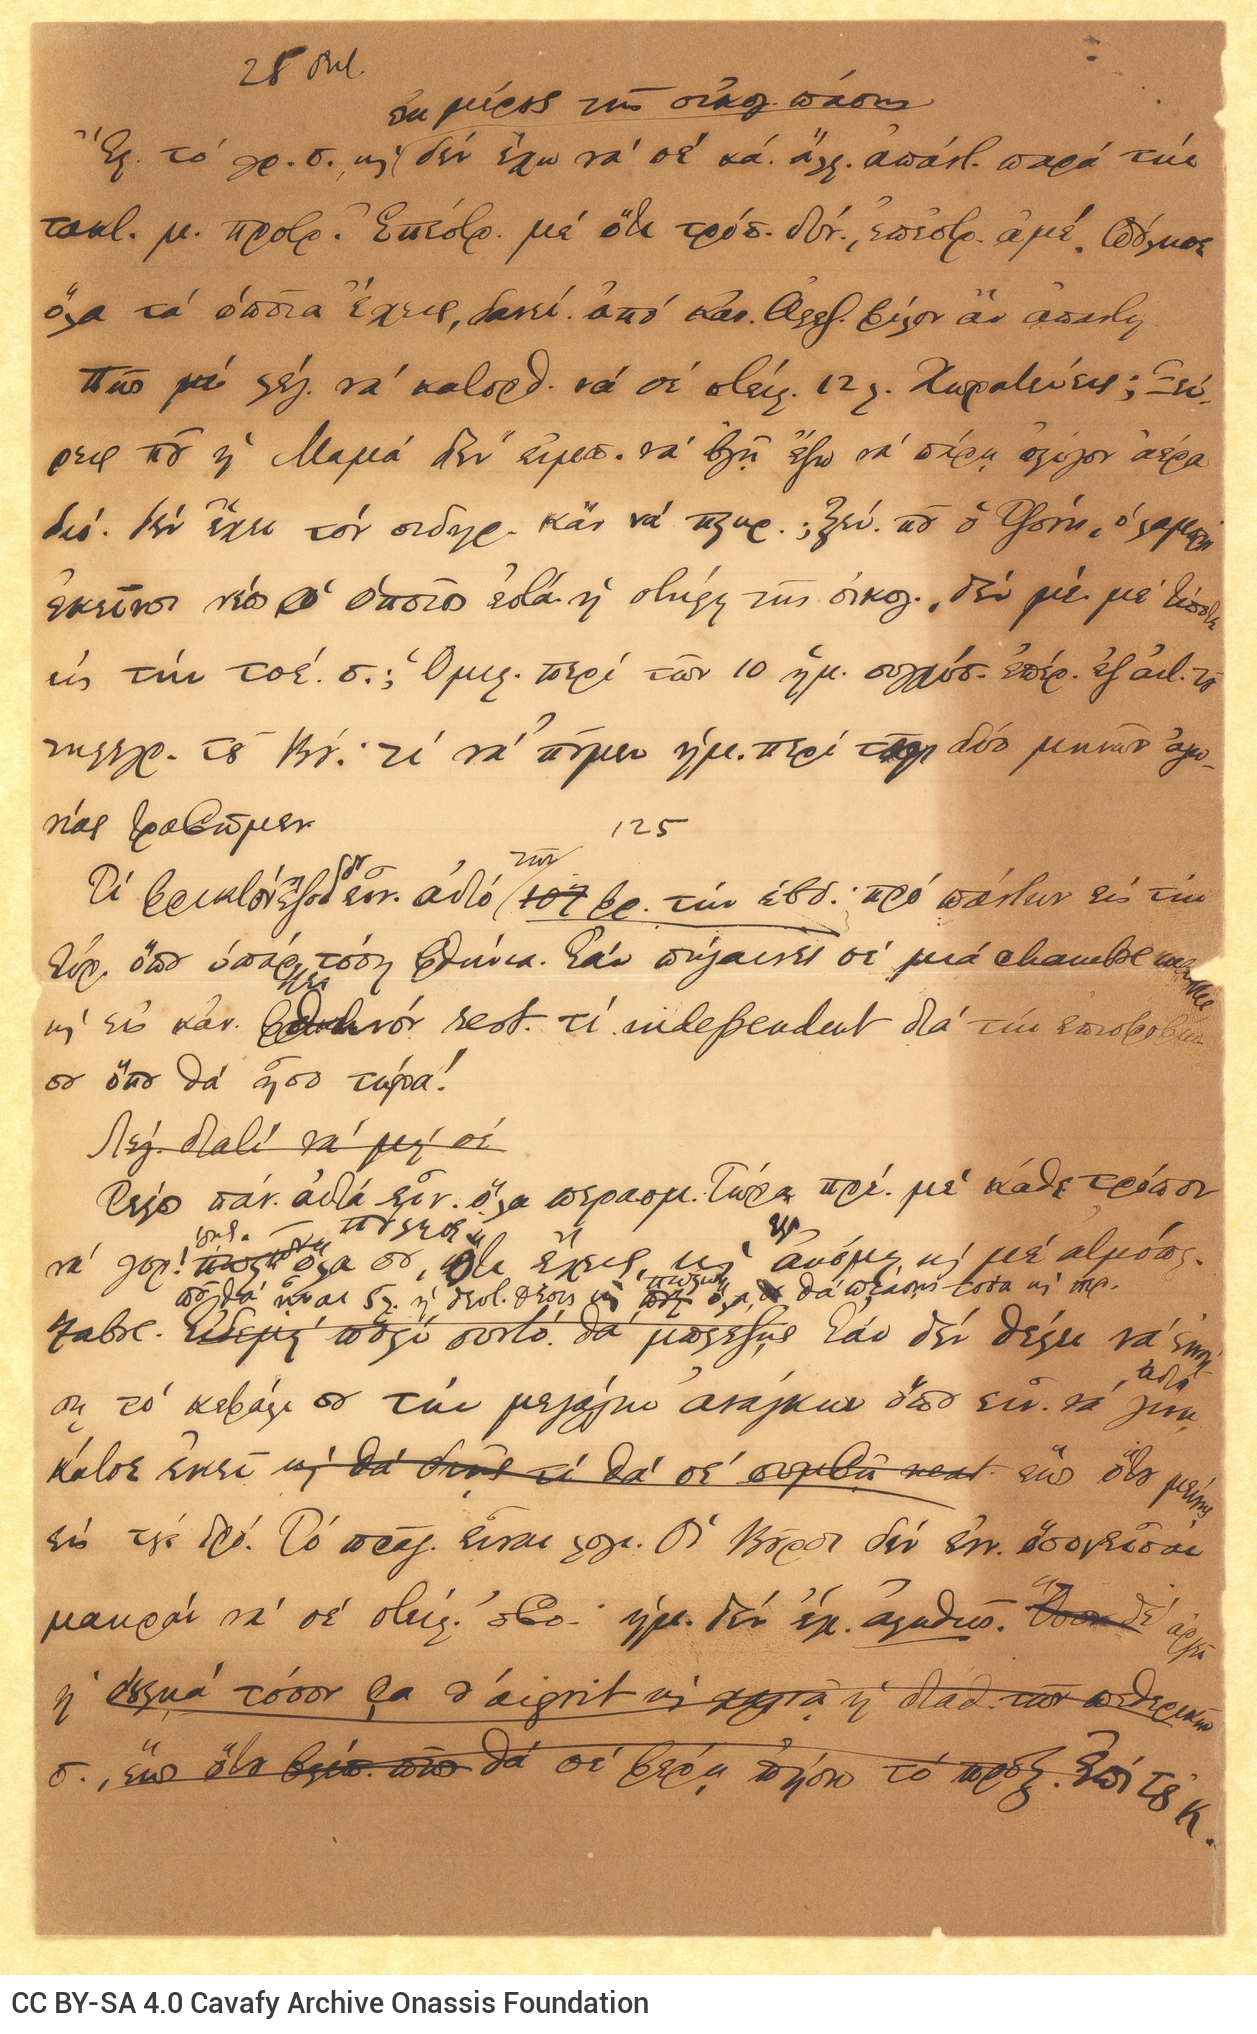 Handwritten draft letter by C. P. Cavafy to his brother, Aristeidis ("25 Oct.") from the 1889 correspondence series. Cancella